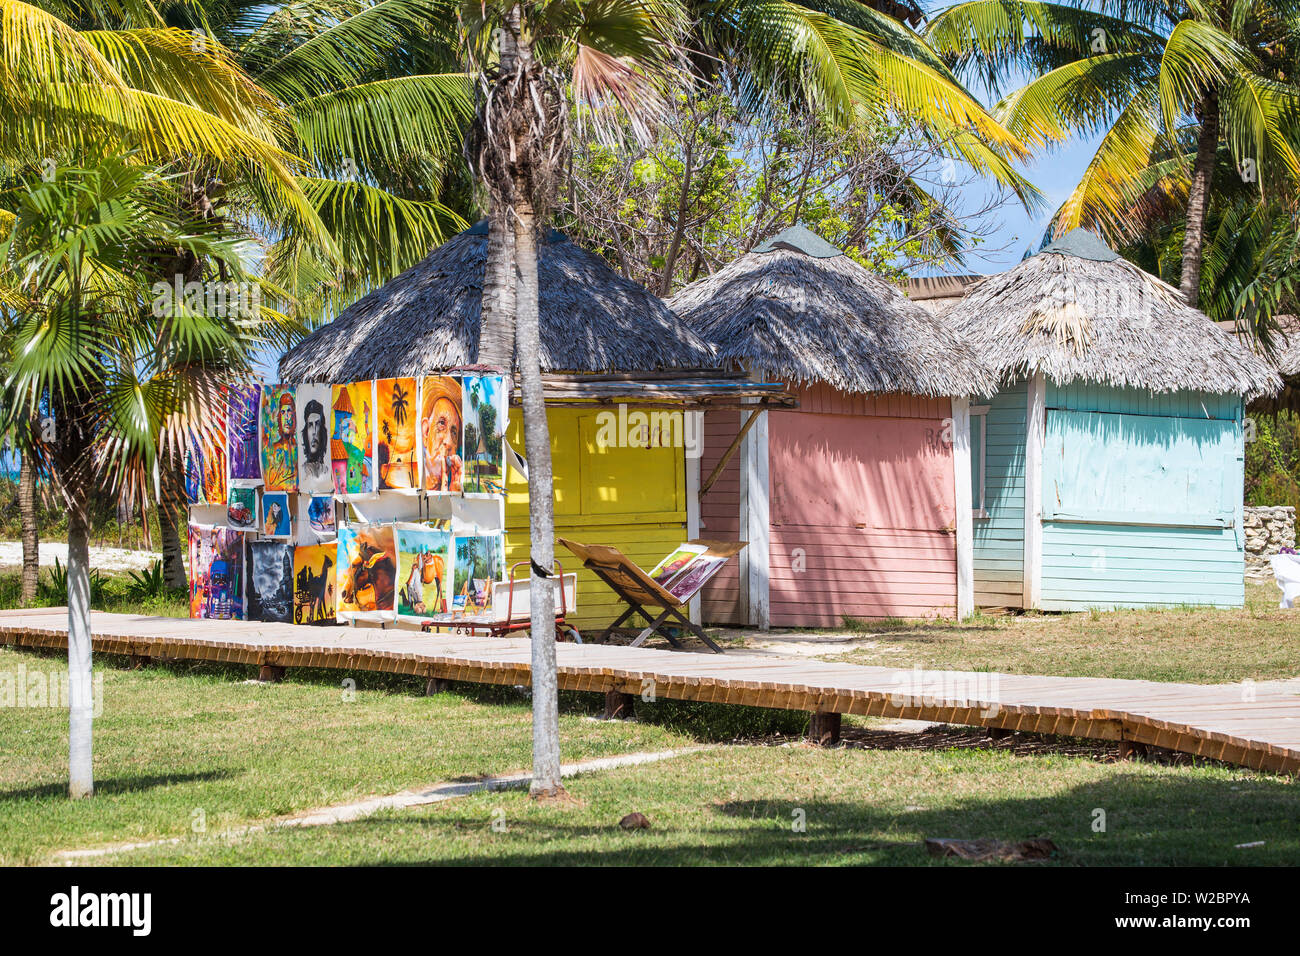 Cuba, Jardines del Rey, Cayo Guillermo, Playa El Paso, Paintings for sale outside thatched hut at Melia Hotel Stock Photo